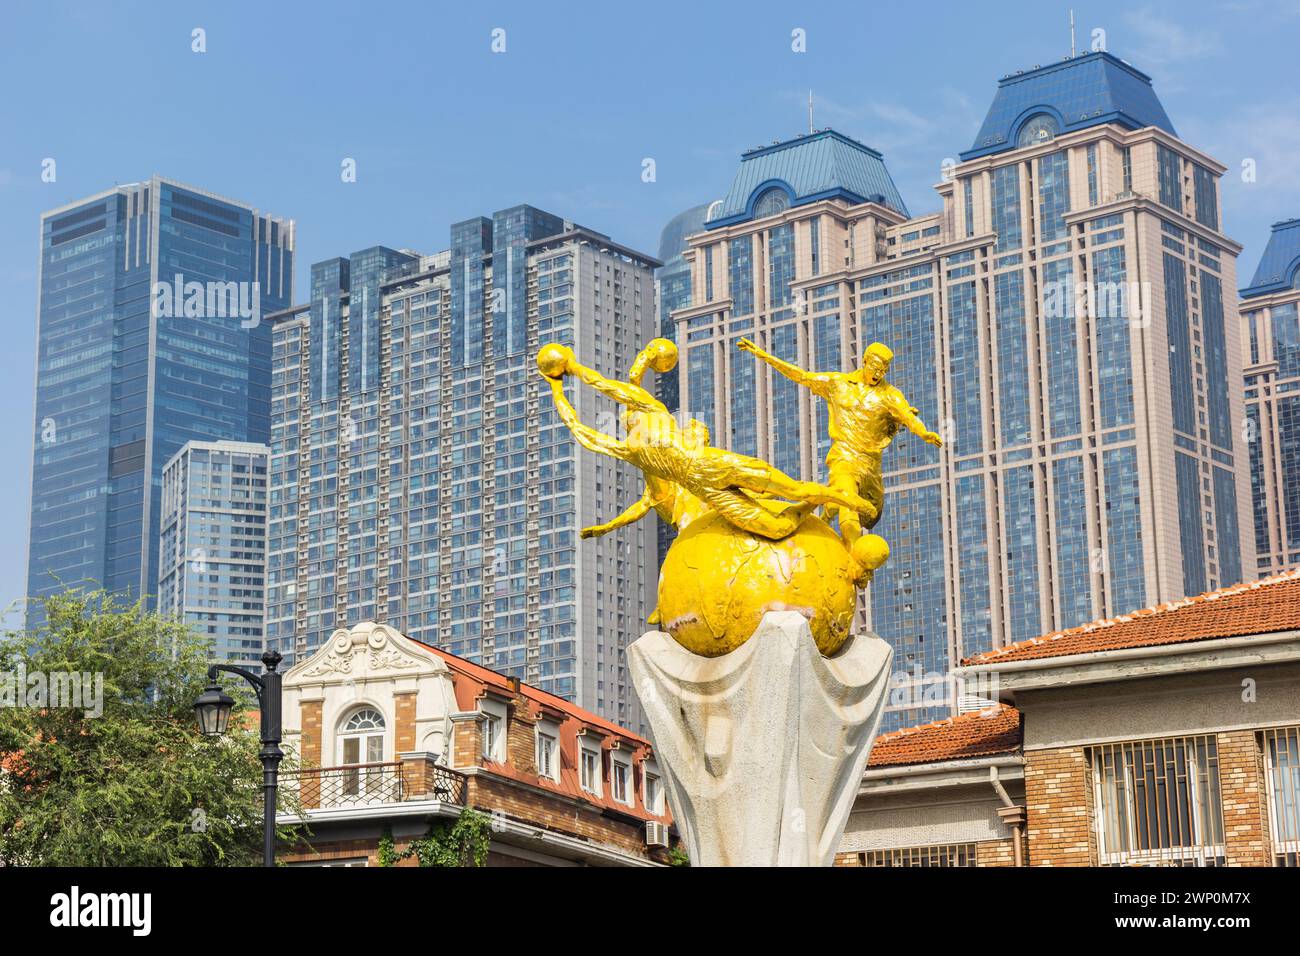 Golden sculpture of soccer players on the Minyuan square in Tianjin, China Stock Photo